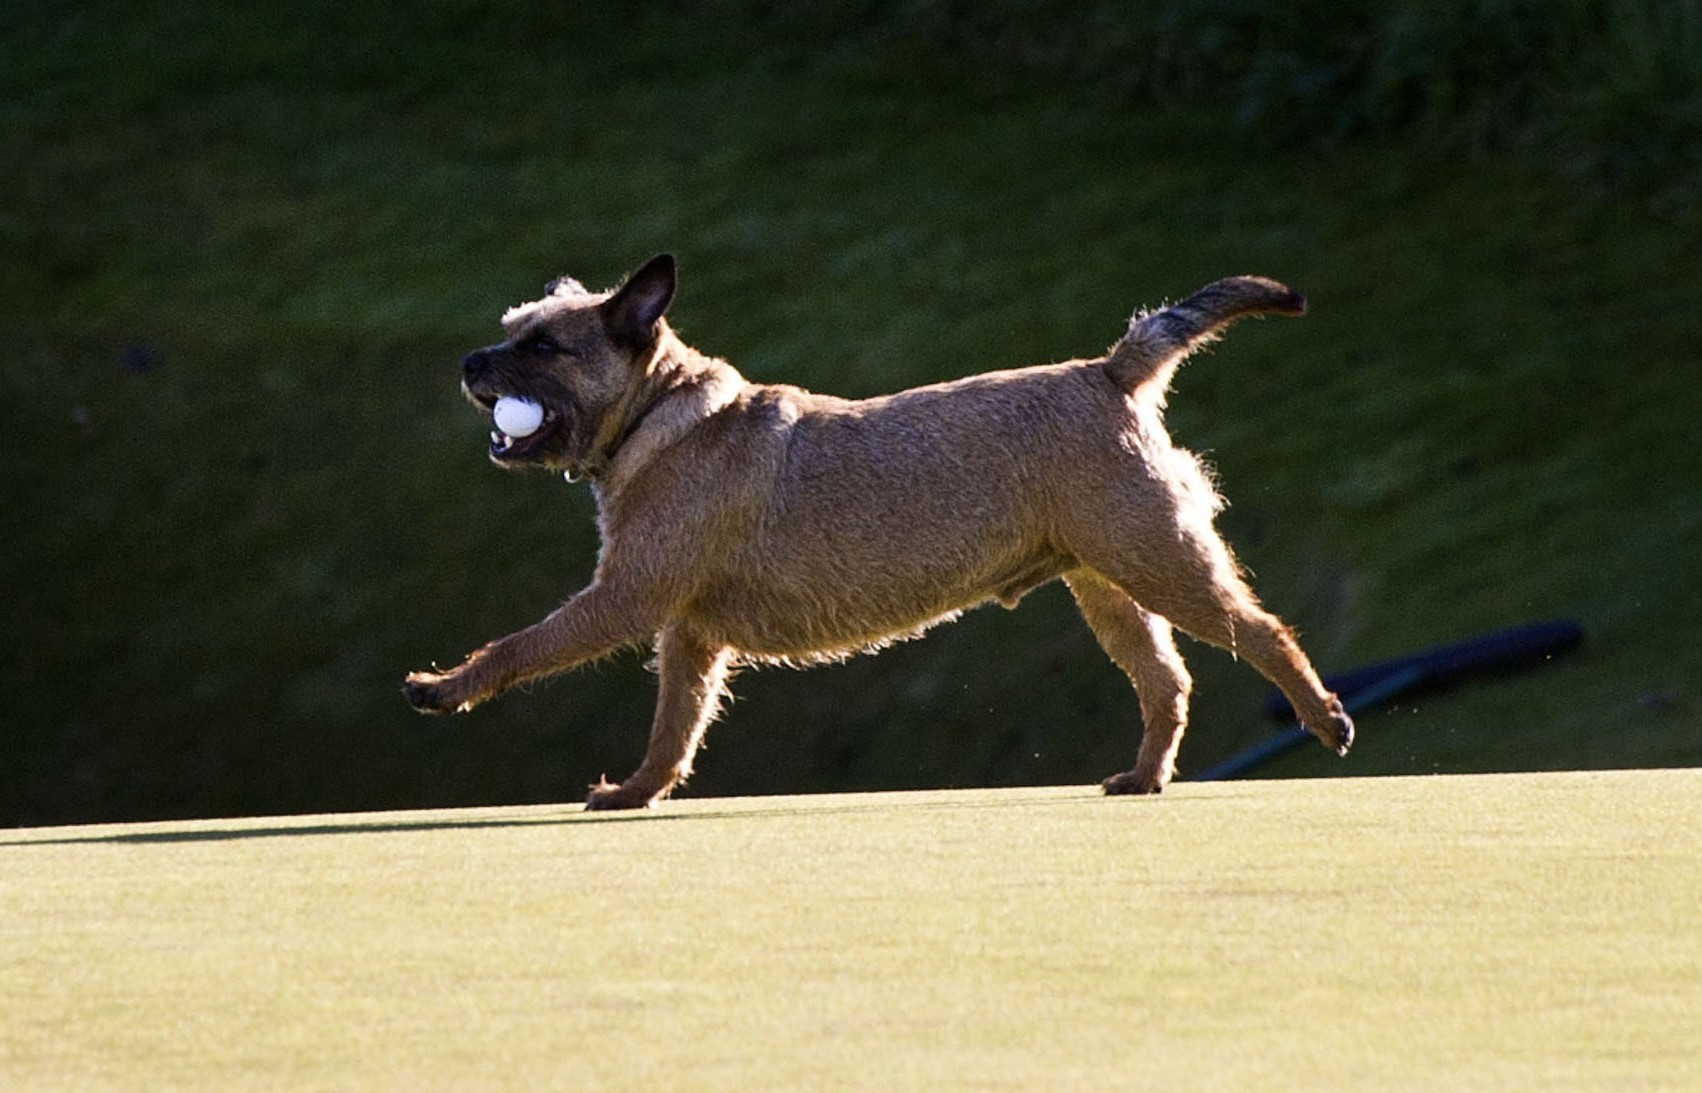 Those who attempt to mix golf and dogs on council-owned courses in Dundee are facing a new ban.